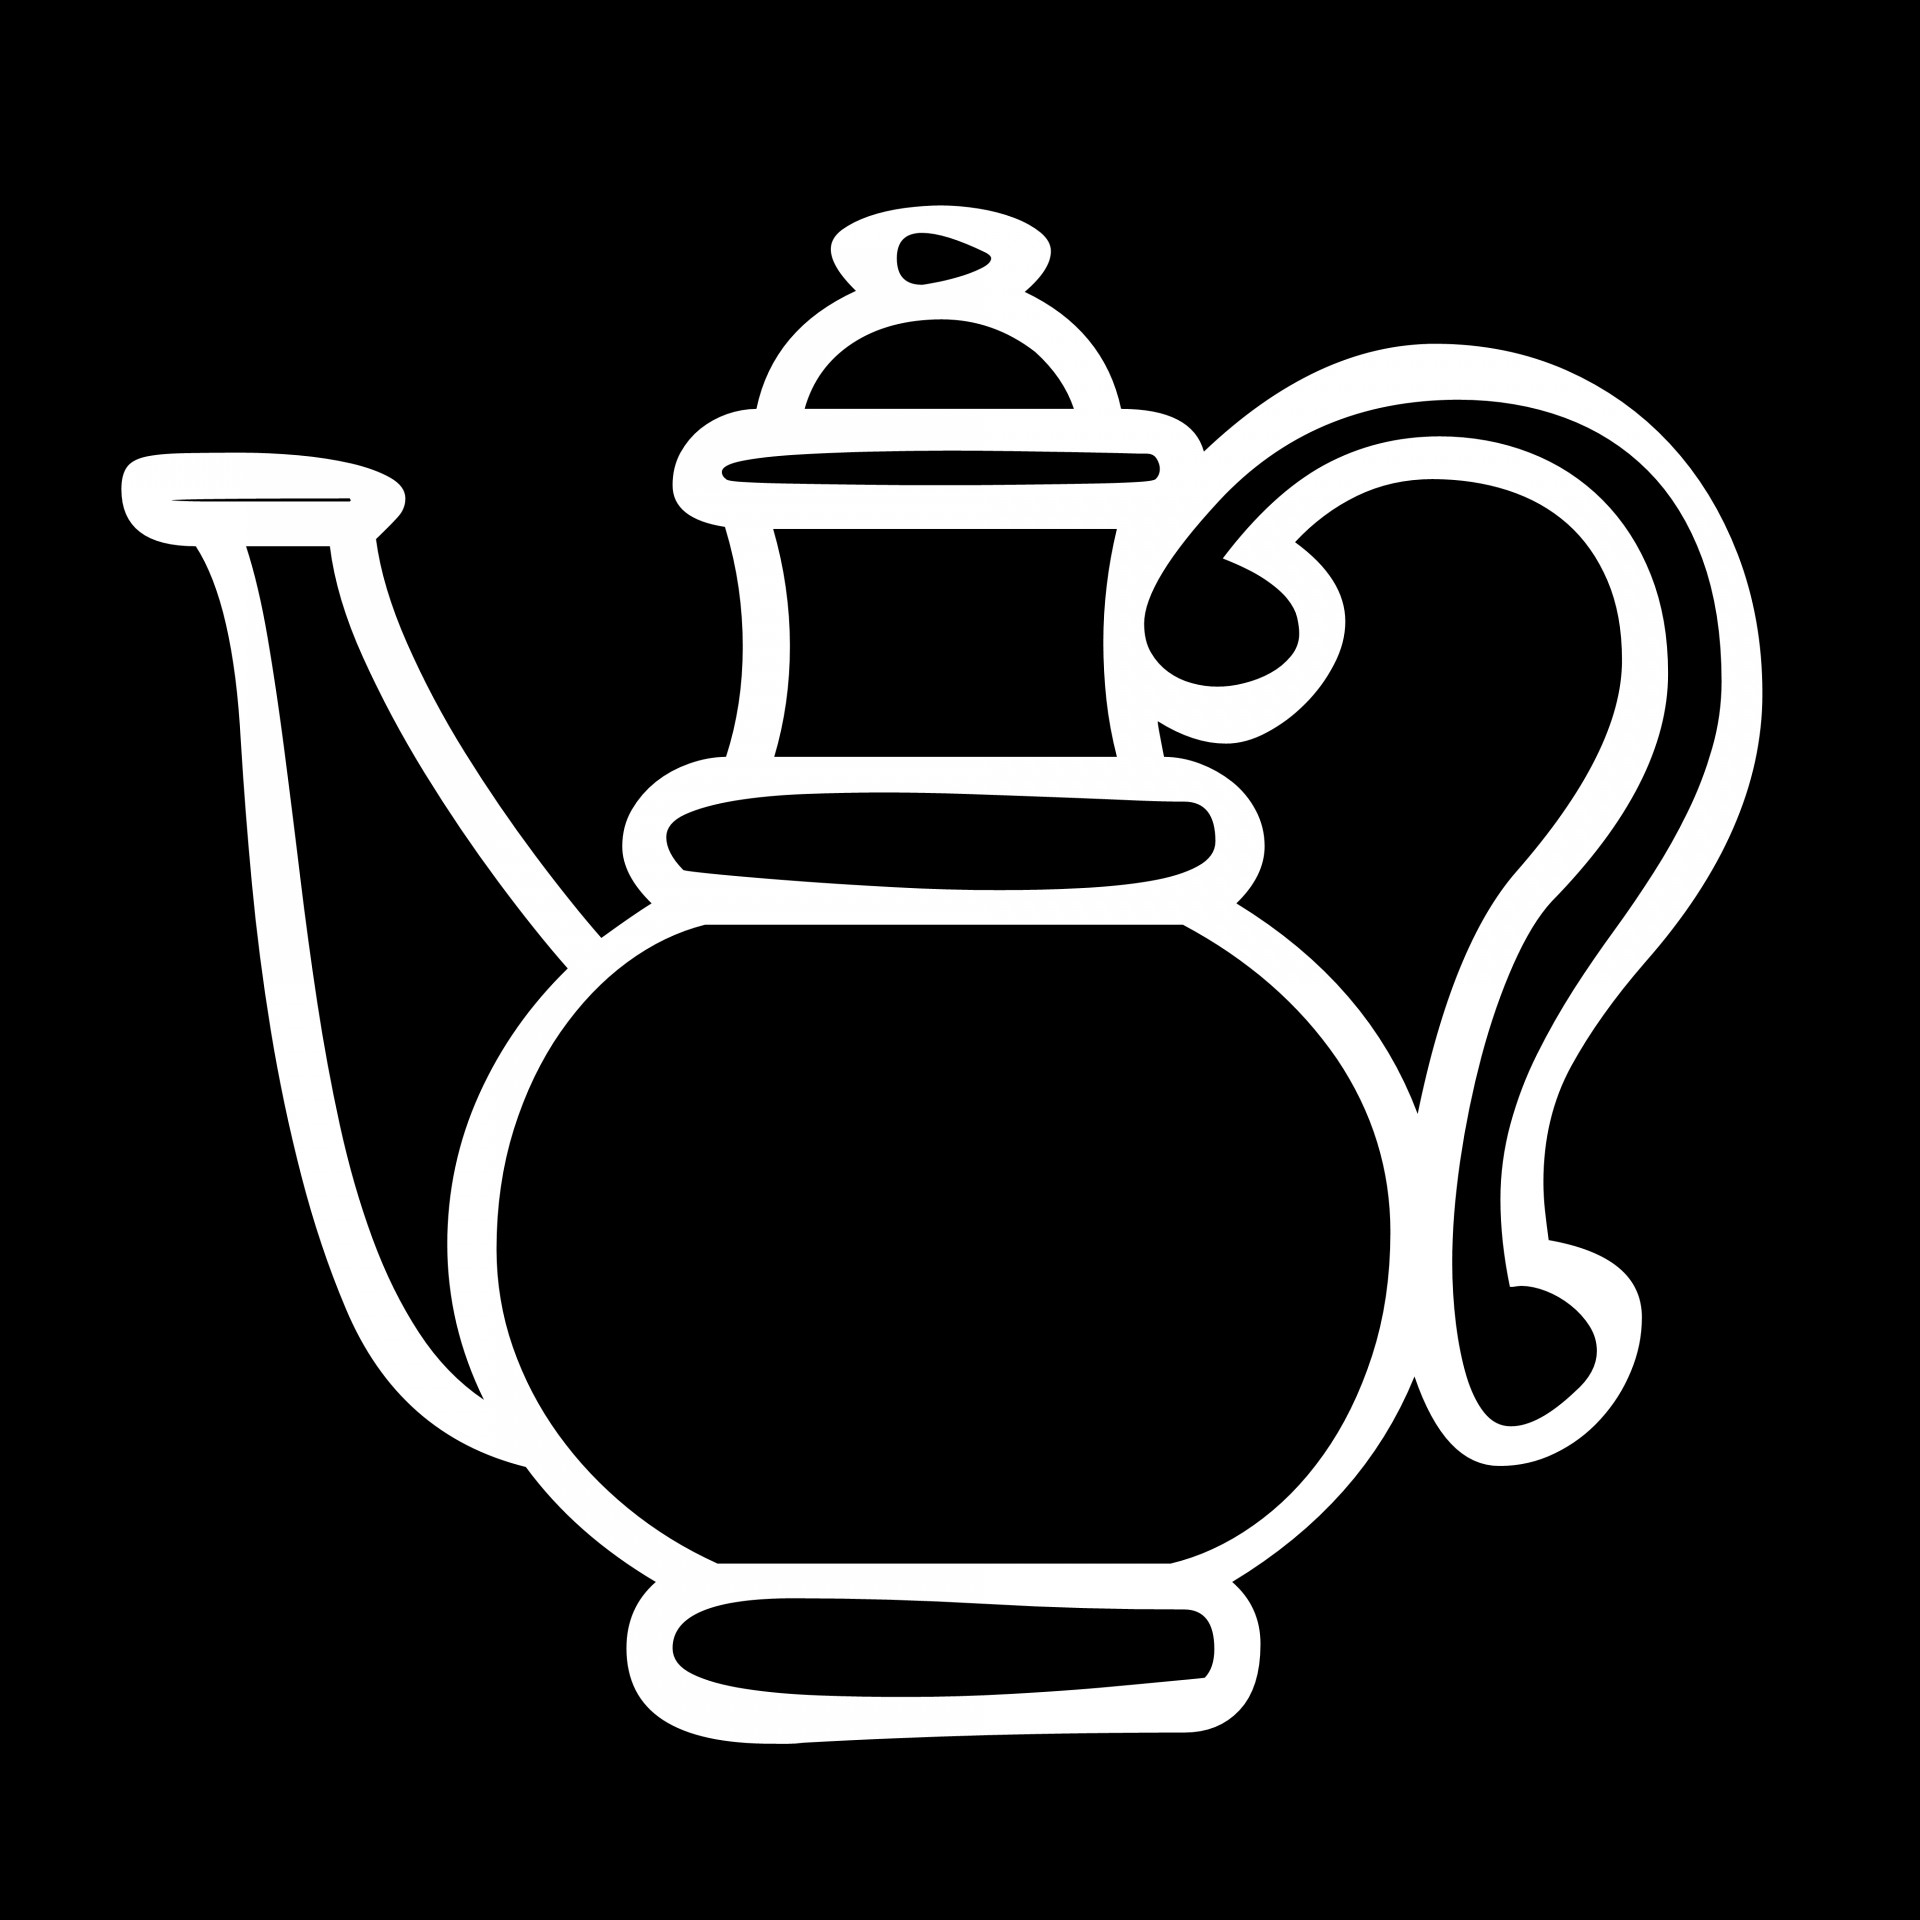 teapot drawing outline free photo